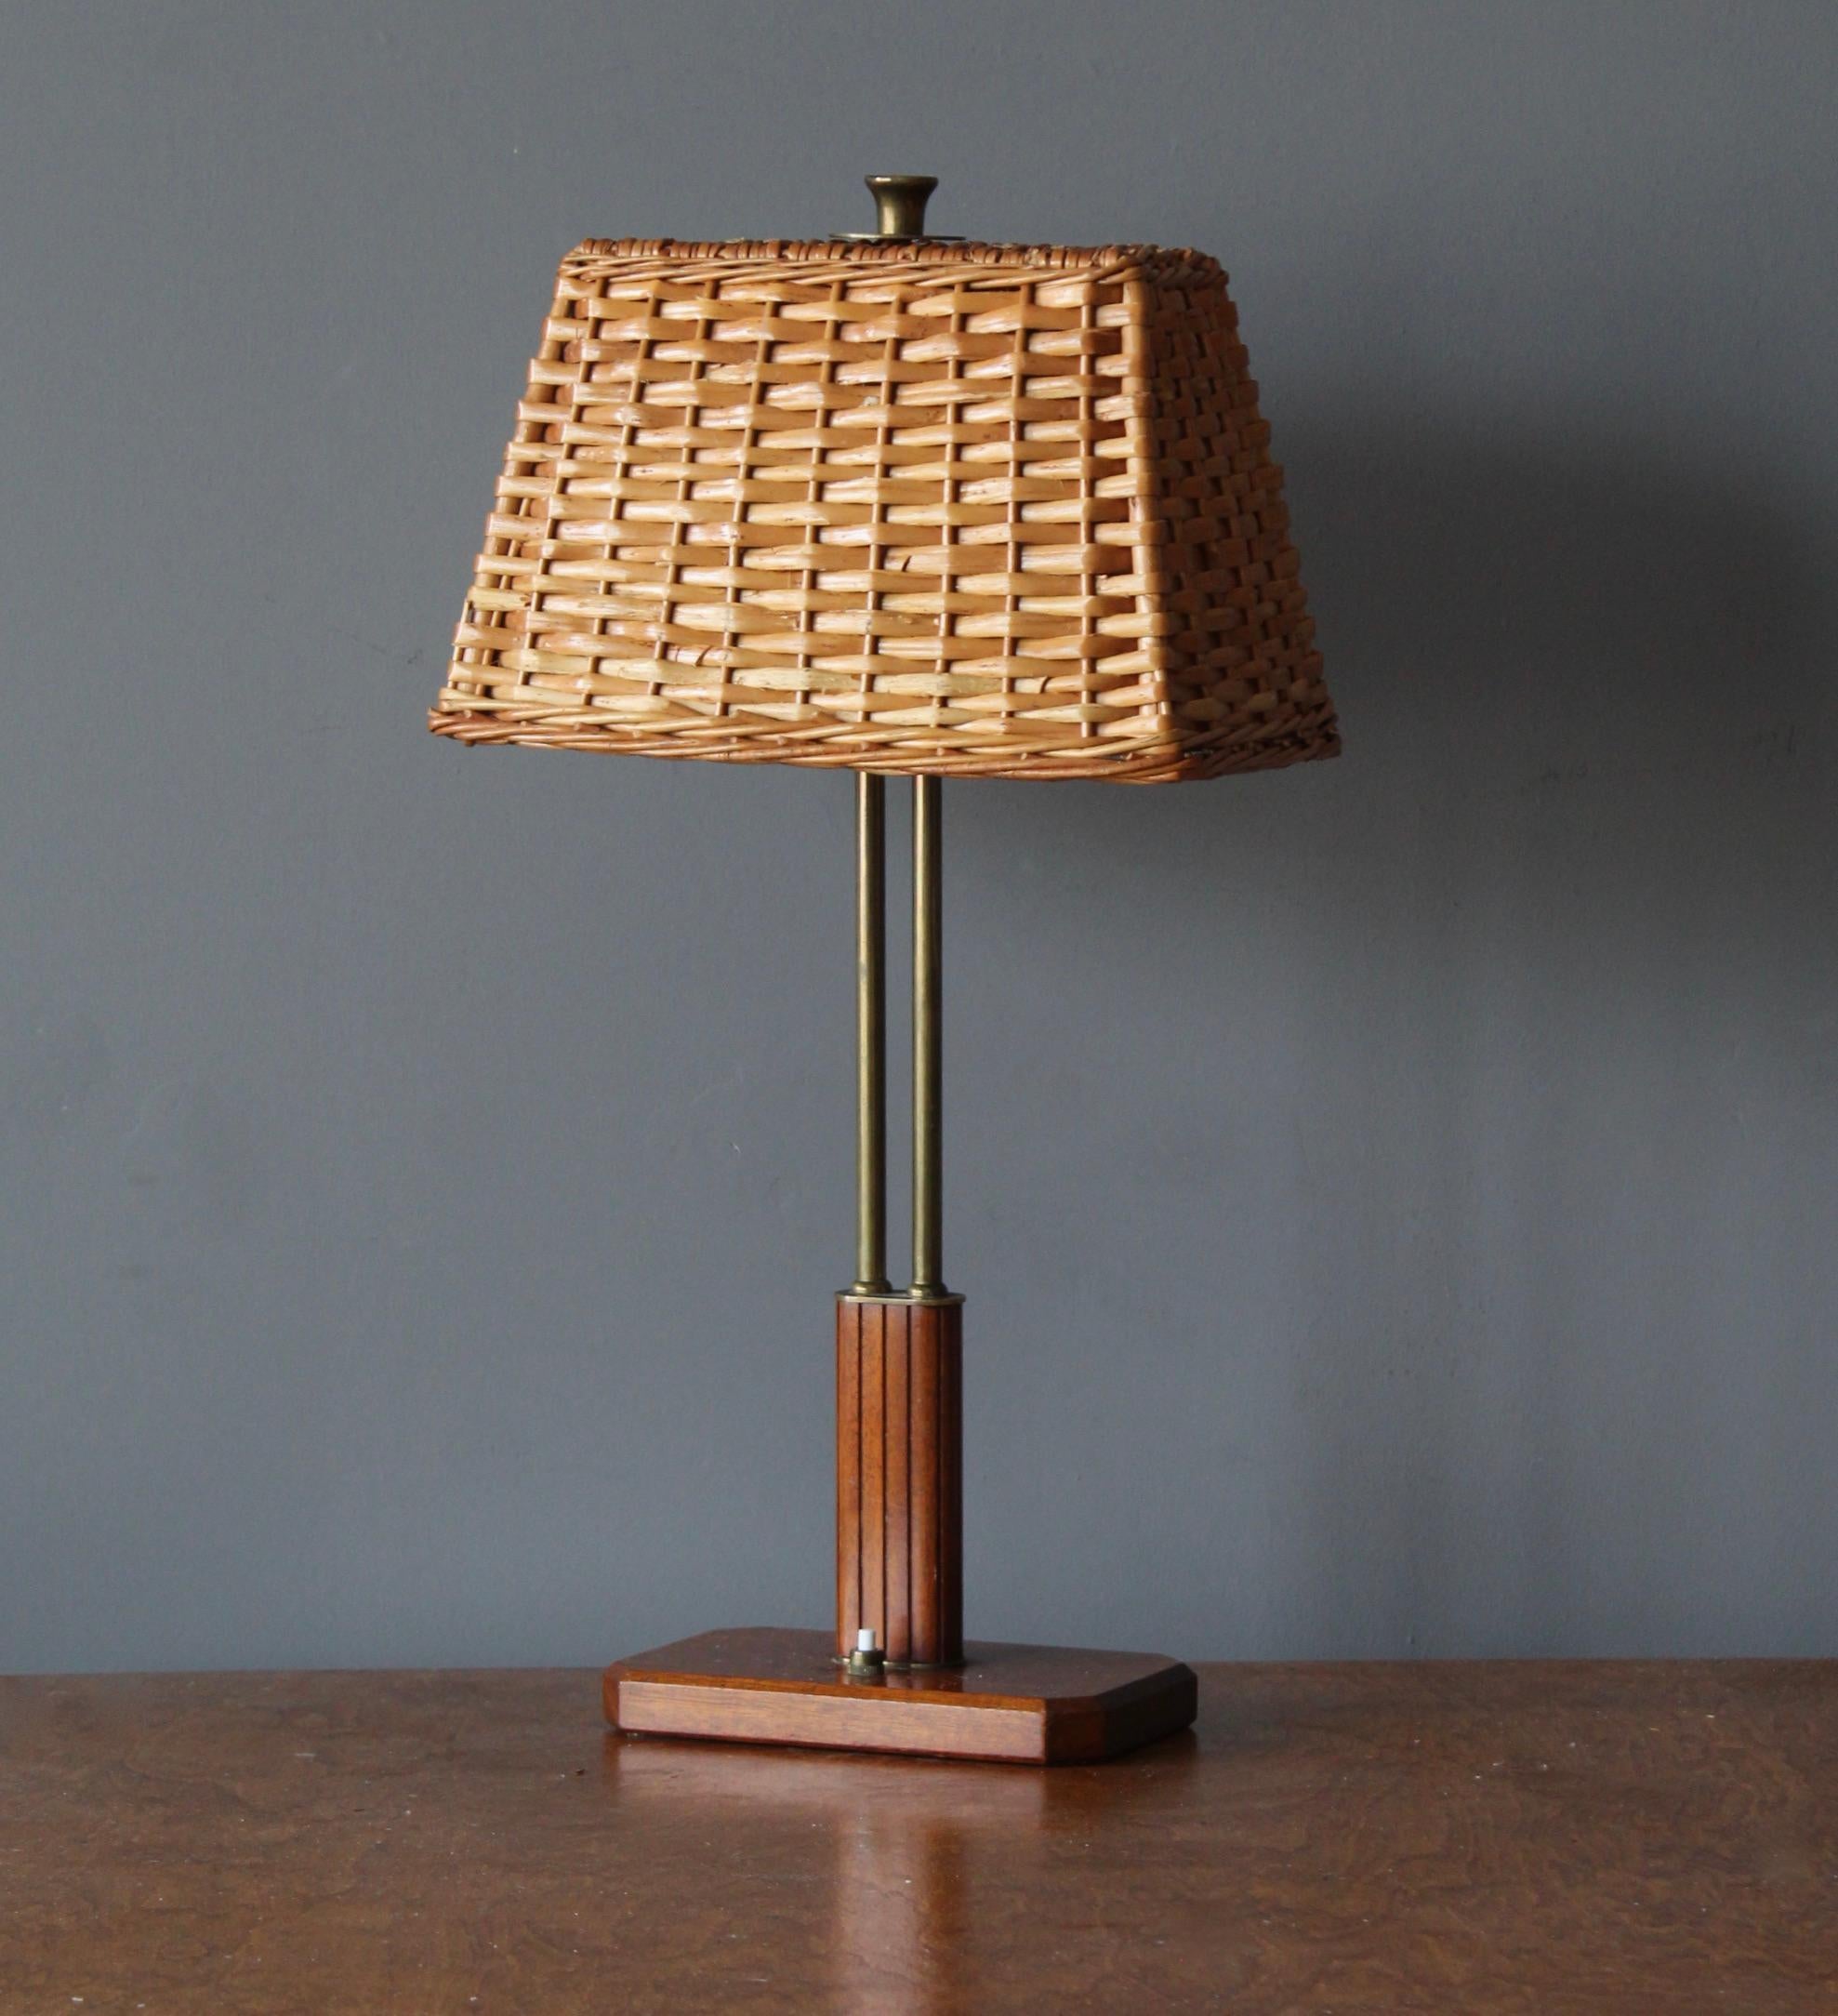 A table lamp. Designed by Harald Notini. Manufactured by Böhlmarks Lampfabrik, Sweden, 1940s. Brass, fluted mahogany. Assorted vintage rattan lampshade with original mounting hardware.

Other designers of the period include Paavo Tynell, Josef